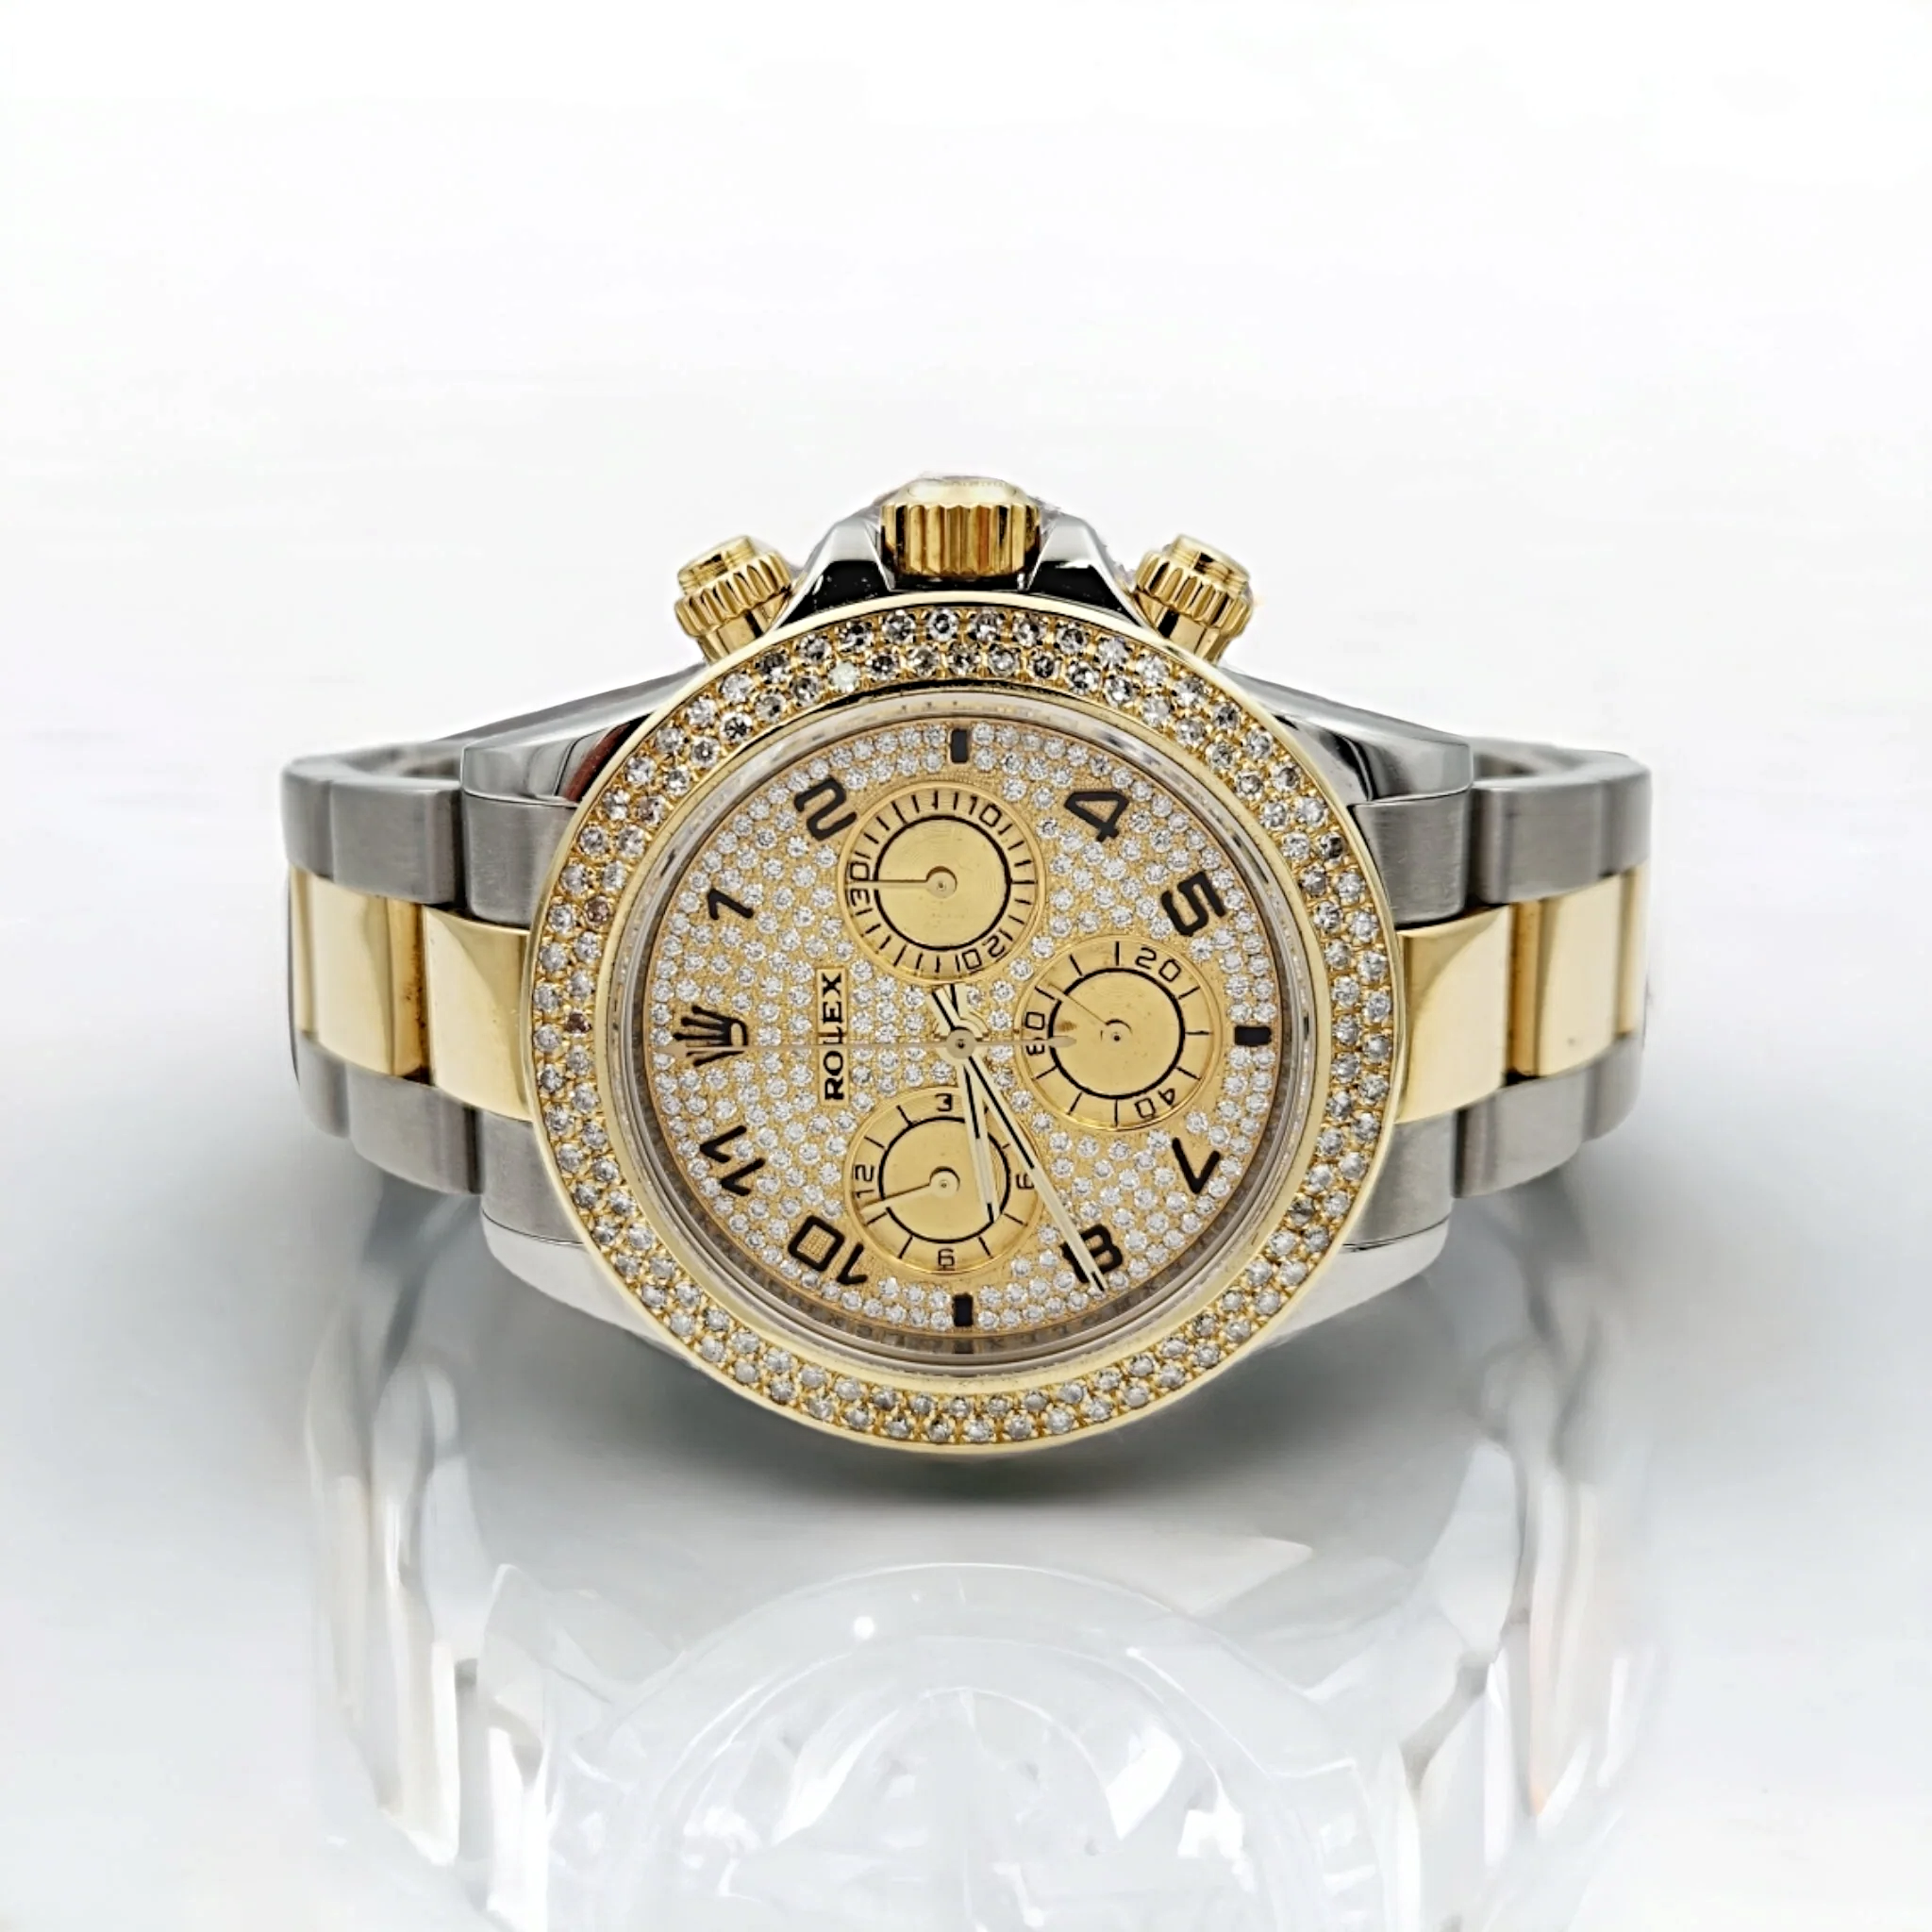 Men's Rolex 40mm Daytona Two Tone 18K Yellow Gold / Stainless Steel Watch with Diamond Dial and Diamond Bezel. (Pre-Owned 116523)